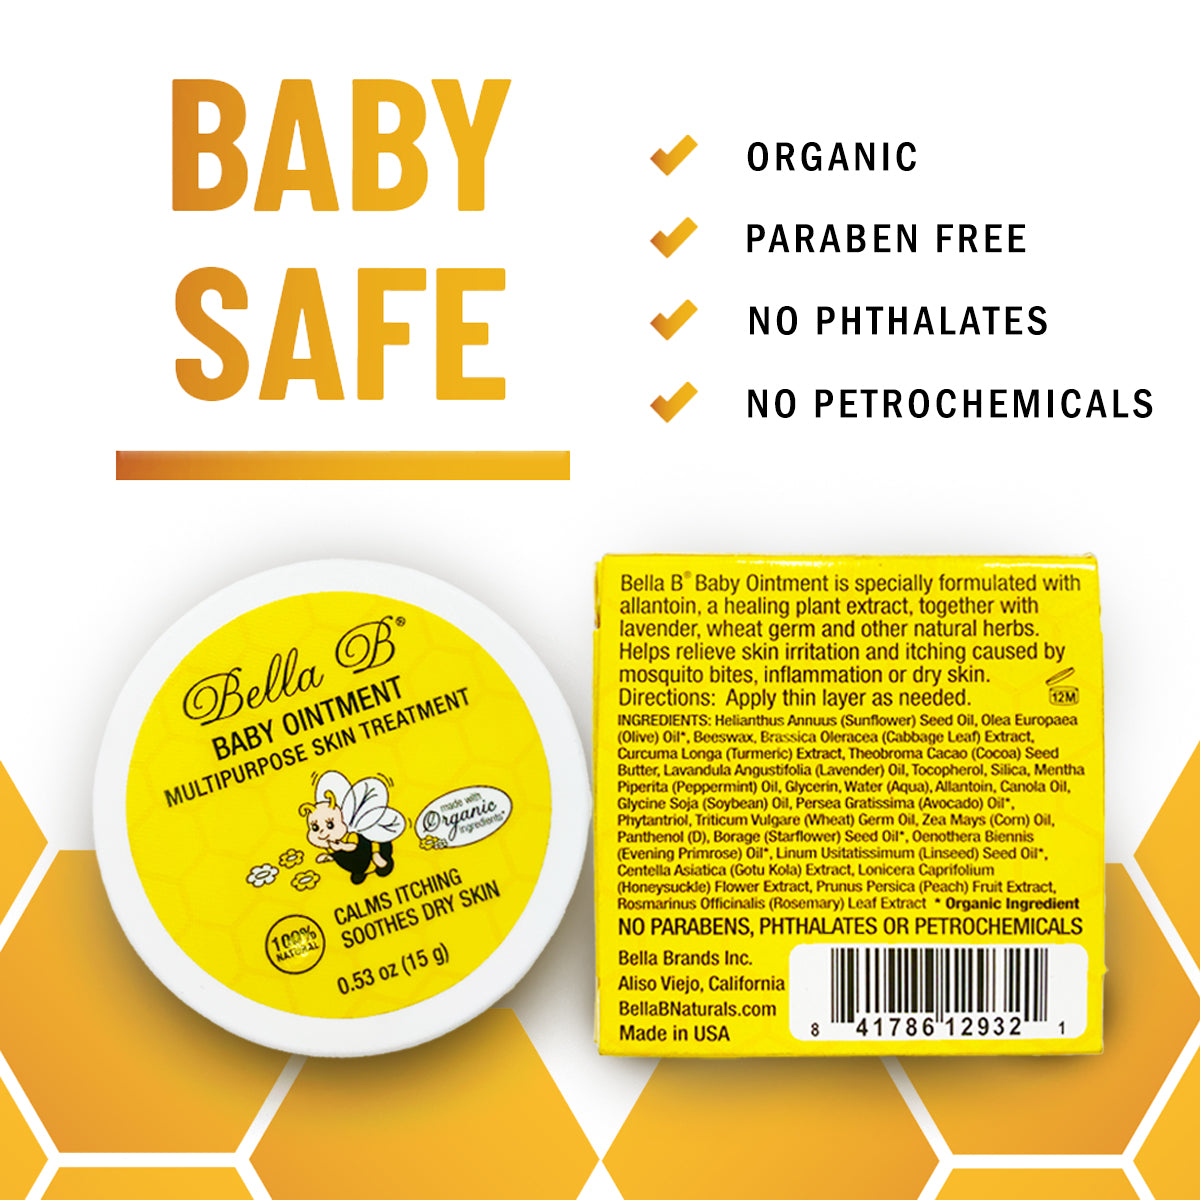 Baby Ointment Multipurpose Skin Treatment 0.5oz